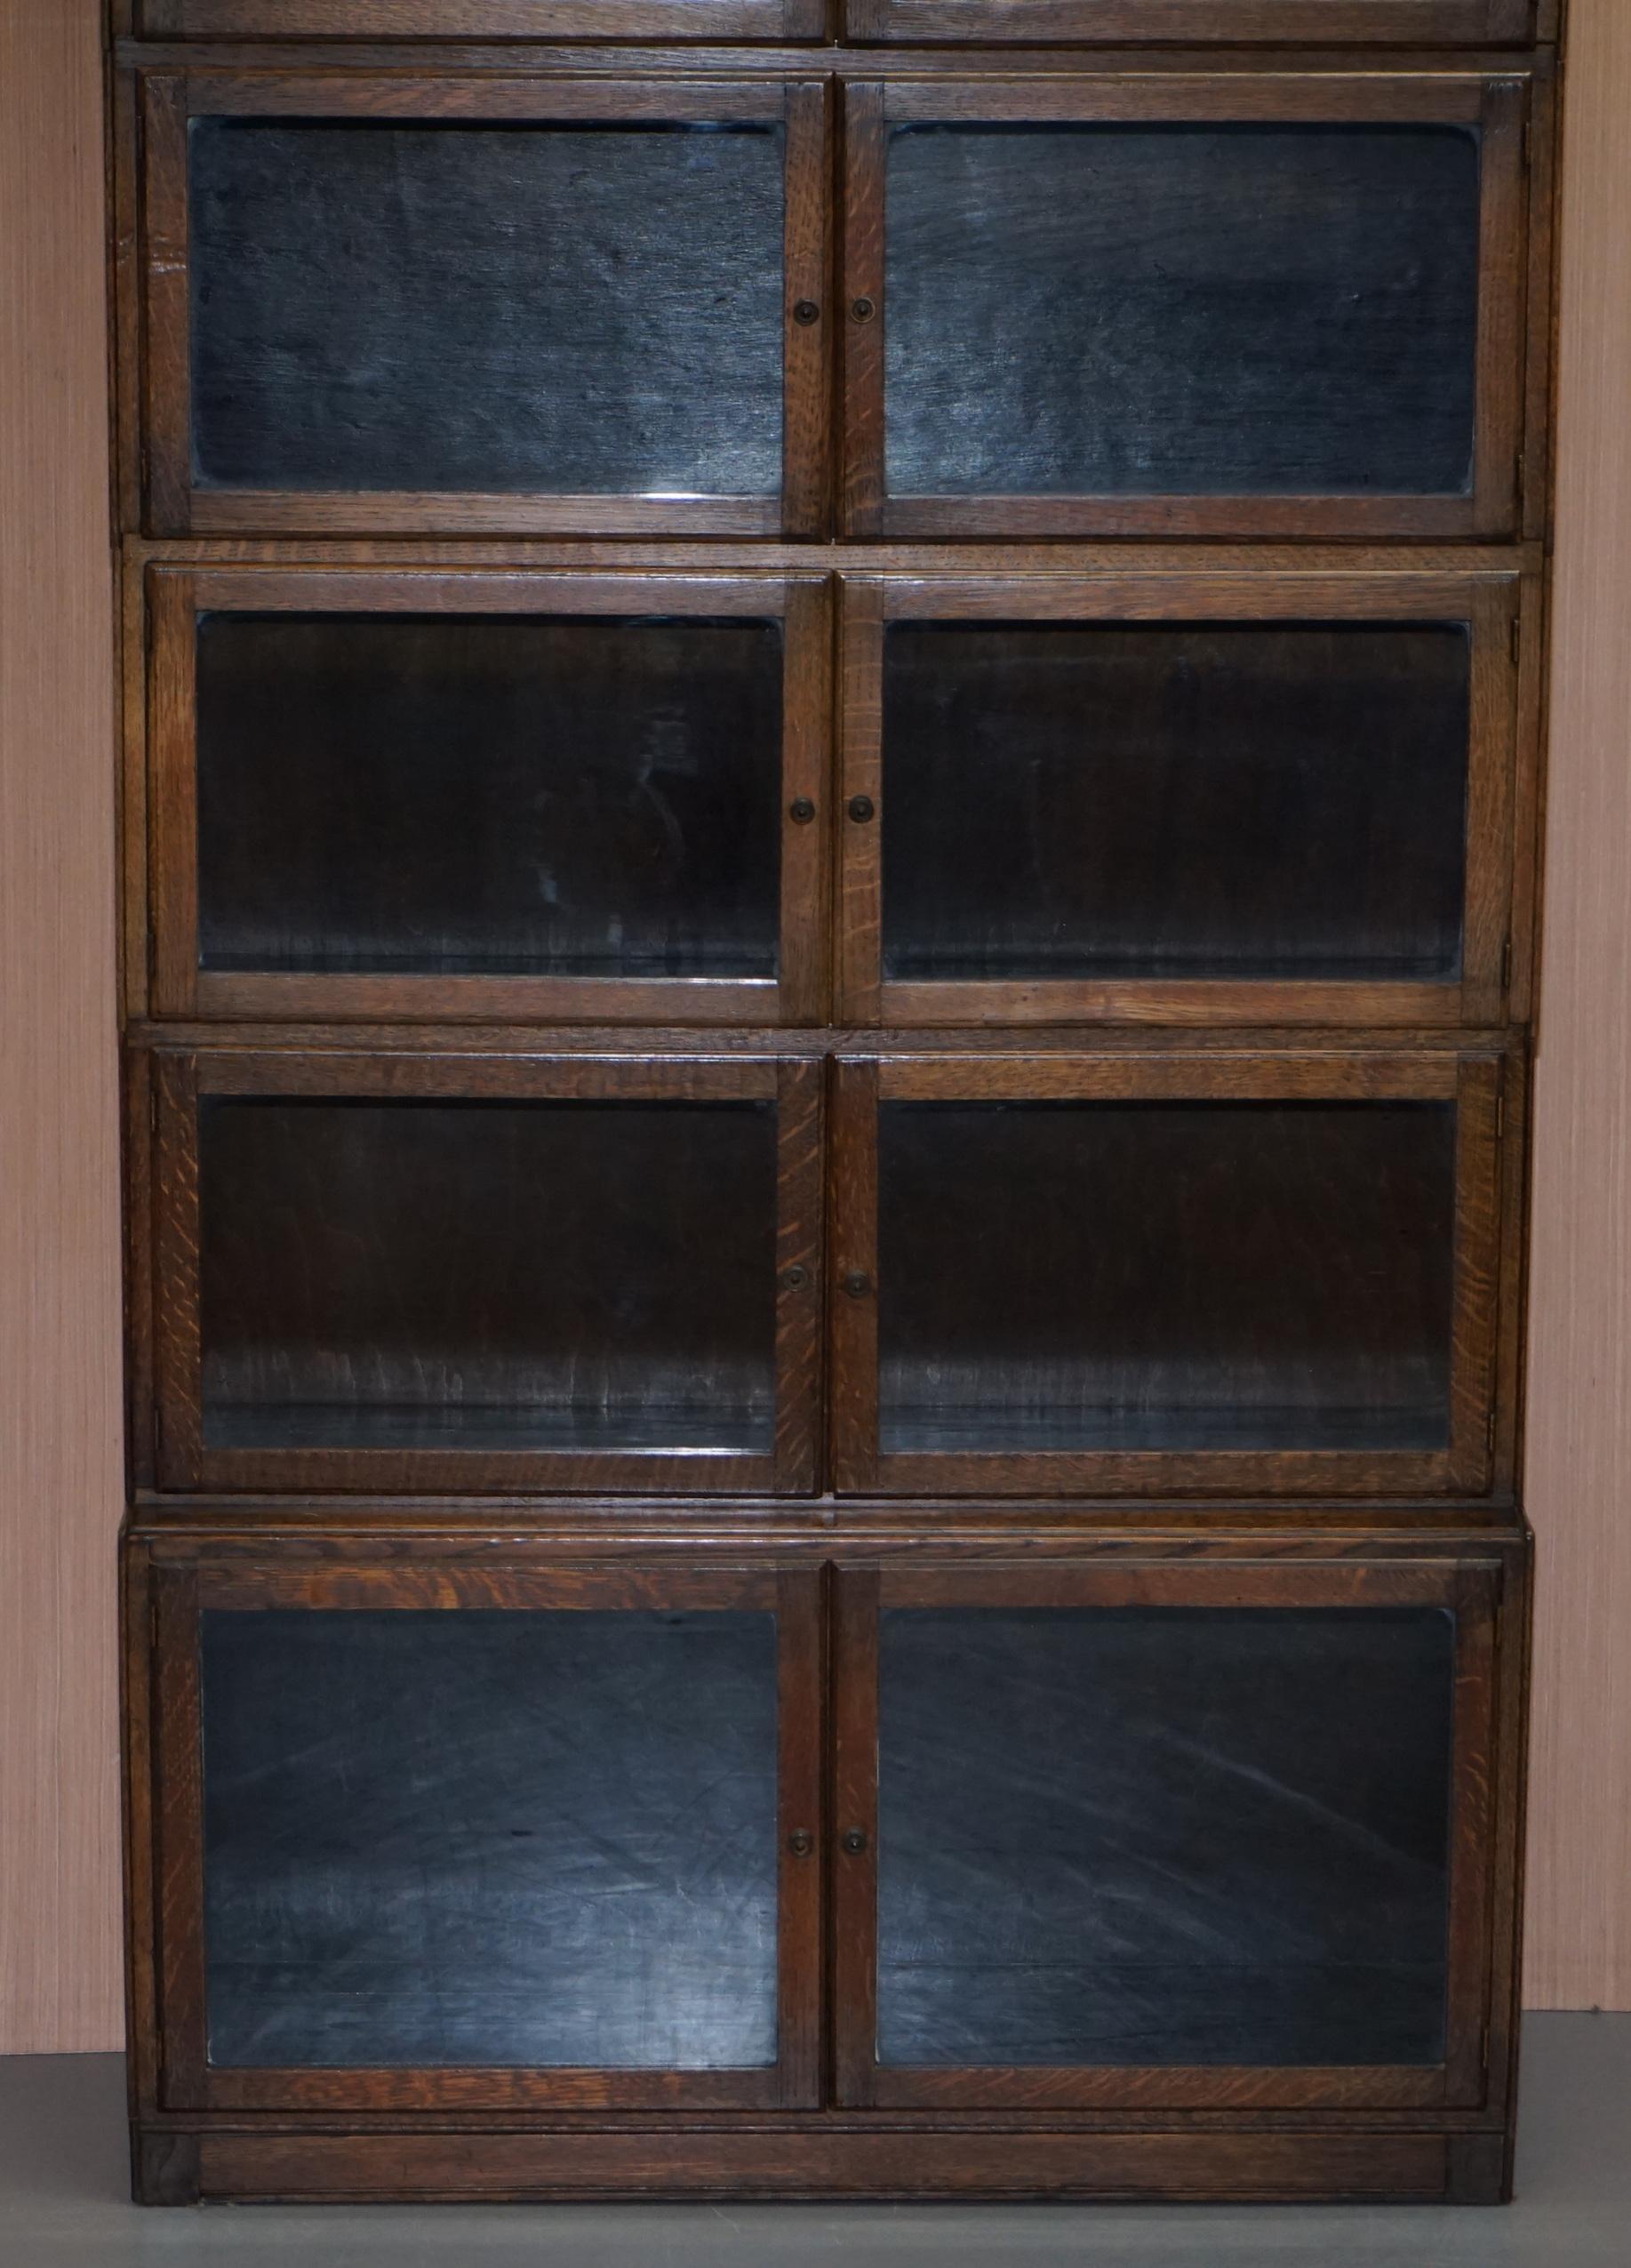 English Pair of circa 1900 Oak Modular Minty Oxford Antique Stacking Legal Bookcases